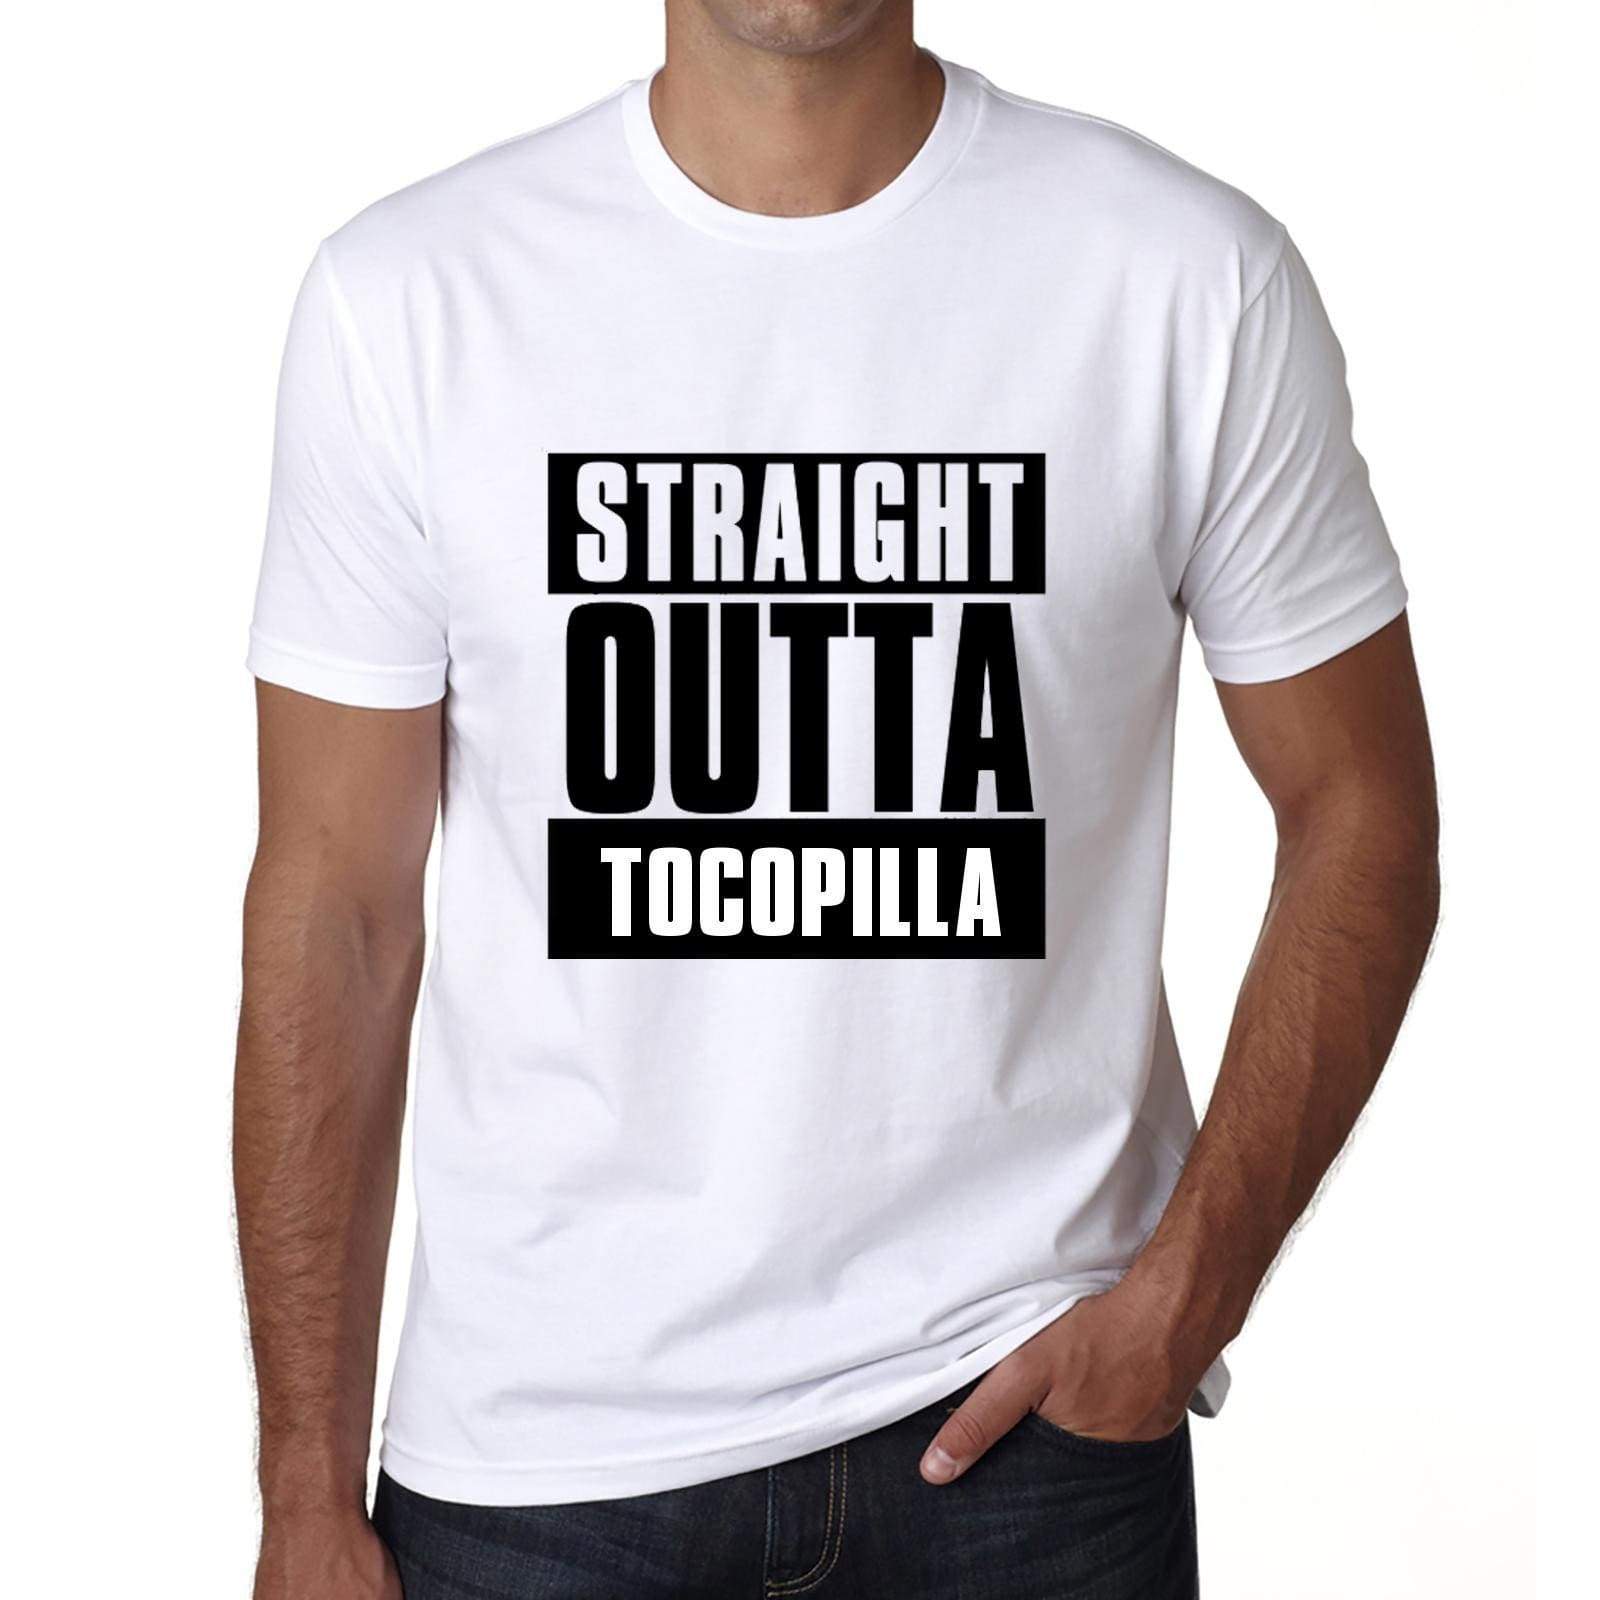 Straight Outta Tocopilla Mens Short Sleeve Round Neck T-Shirt 00027 - White / S - Casual